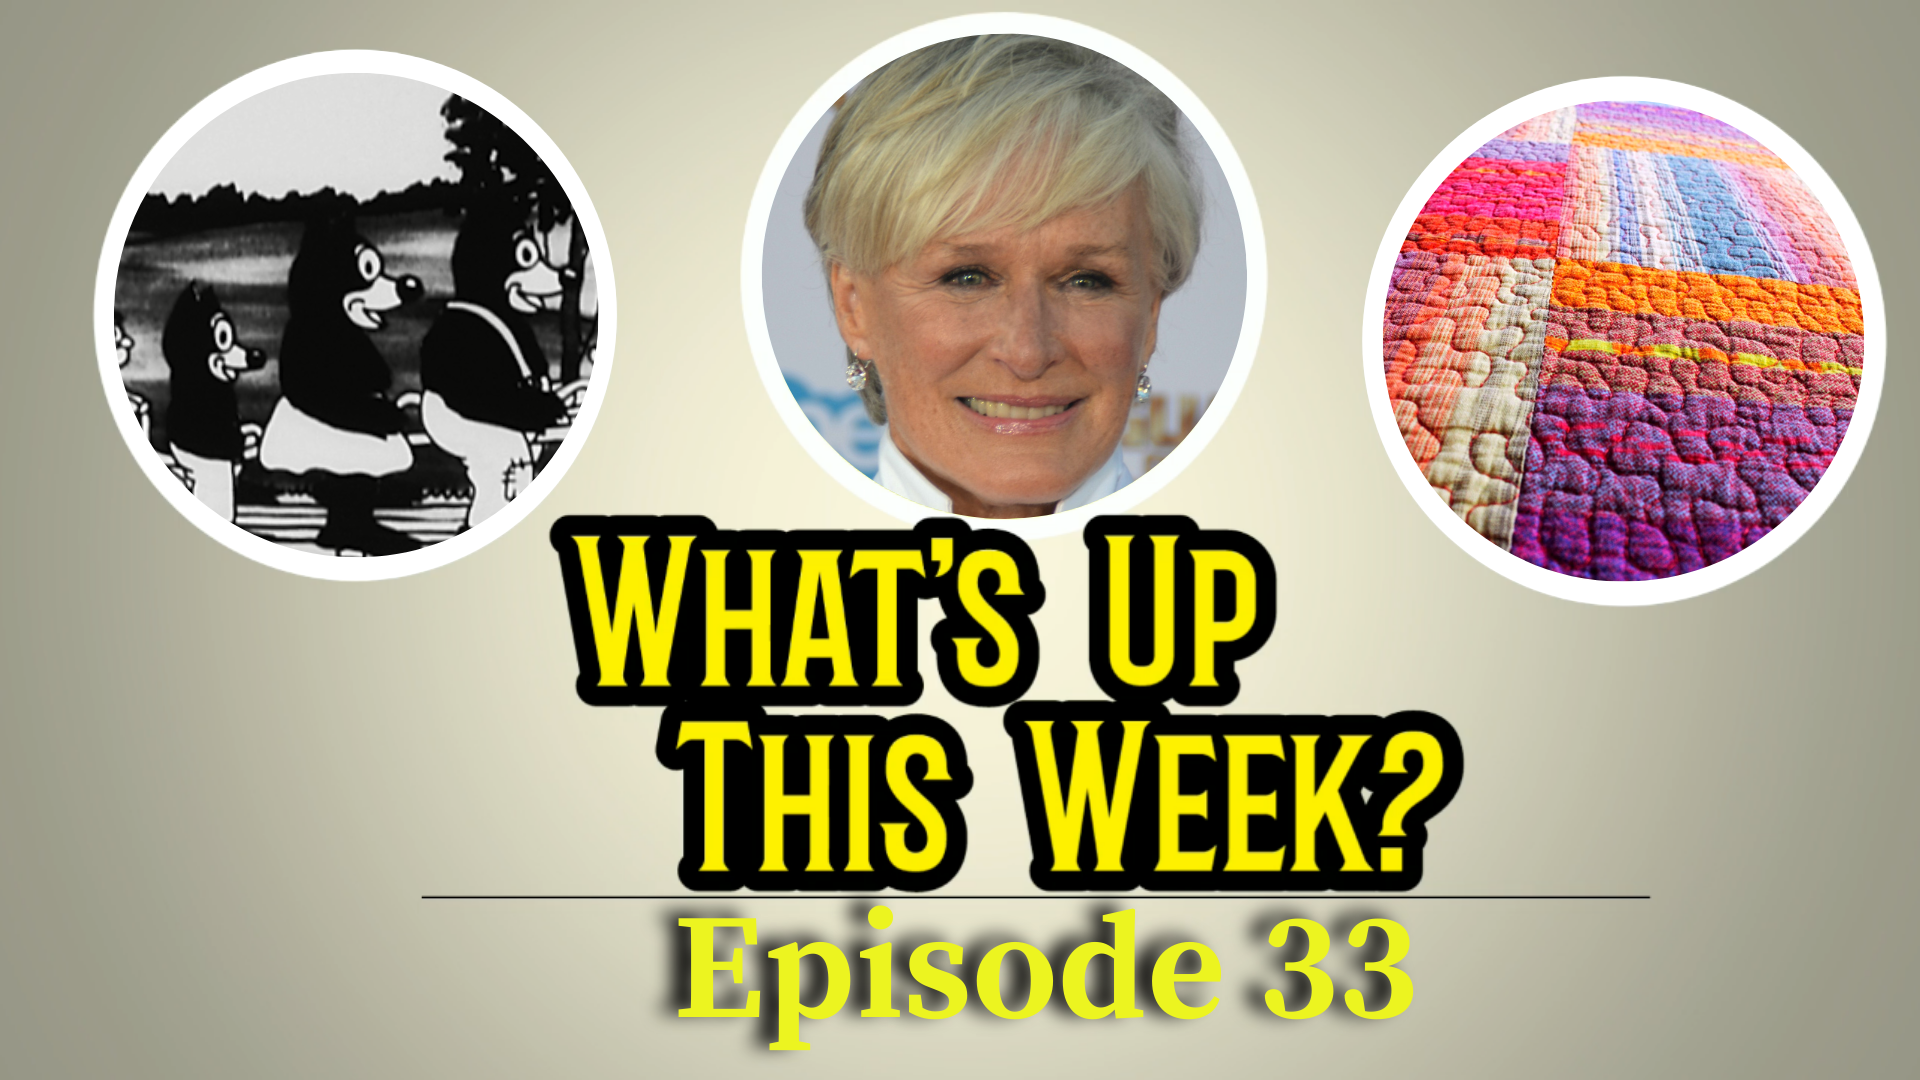 "What's Up This Week: Episode 32". 3 circles with images inside: still image from a Laugh-O-Gram film, Glenn Close, and a quilt.